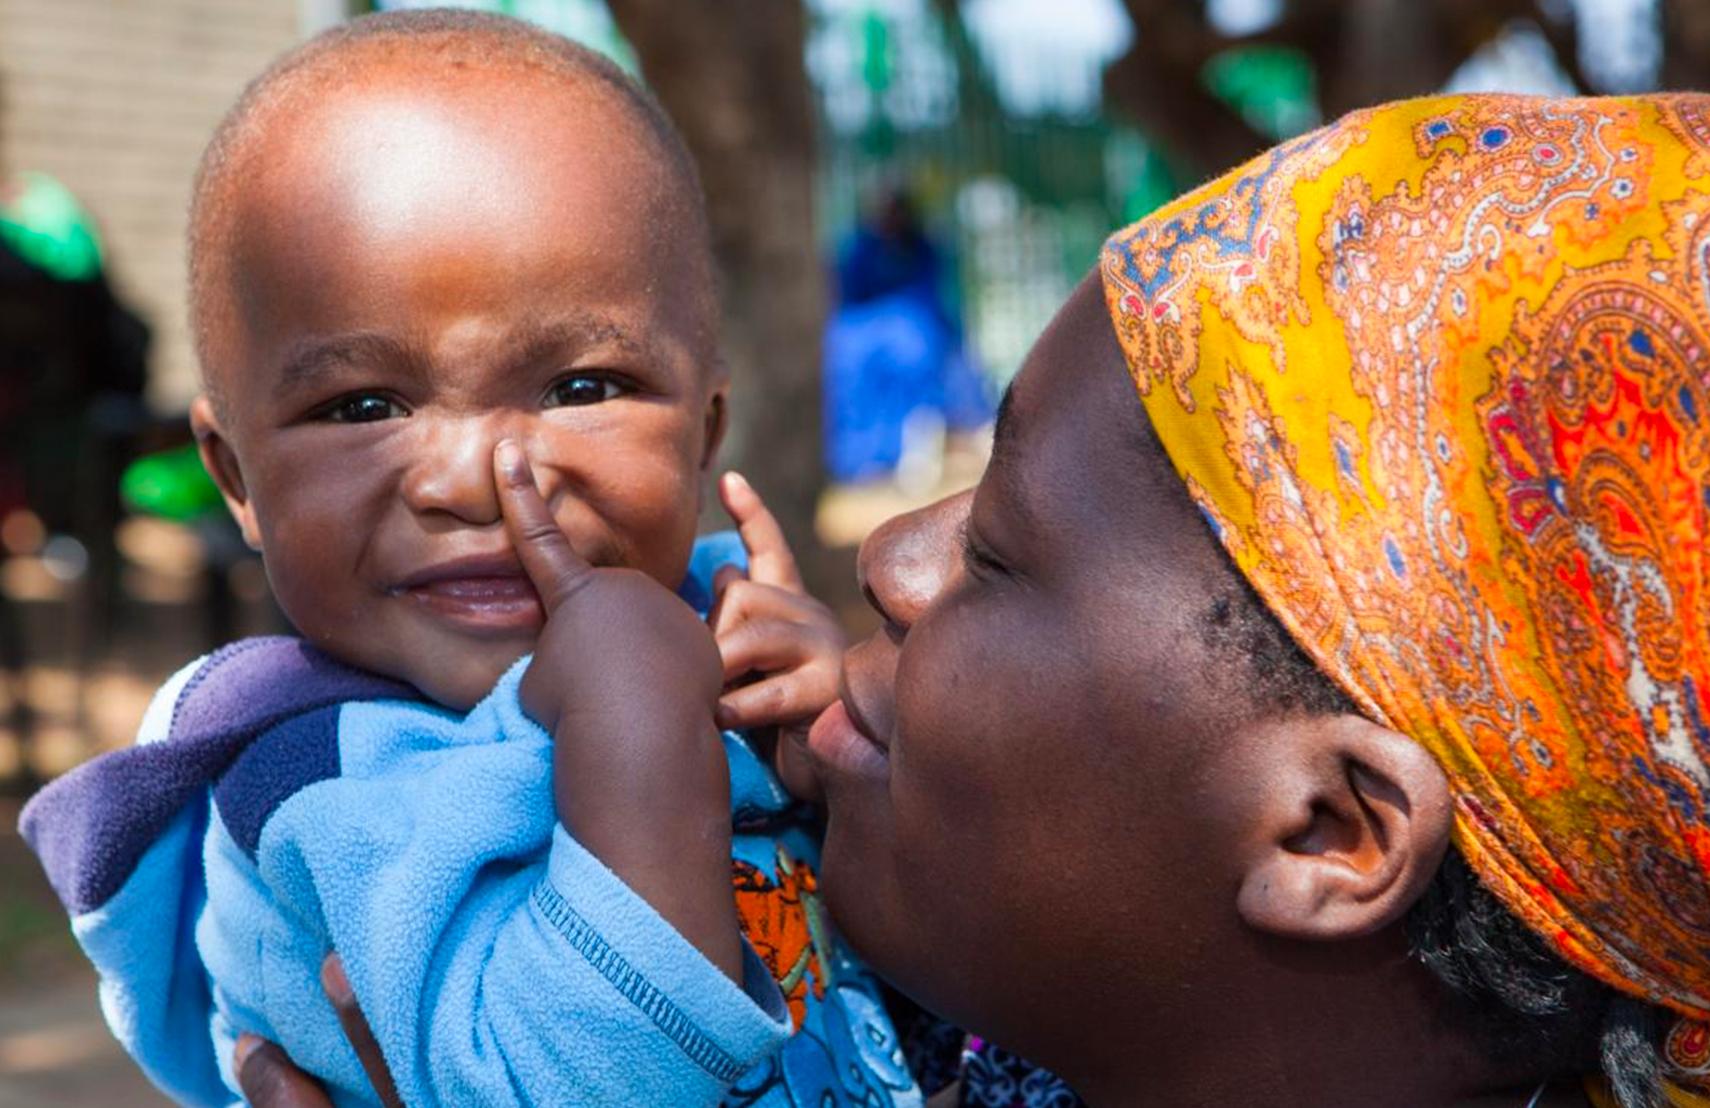 Mother holding her child at a market, and the child is smiling and pointing at their nose.